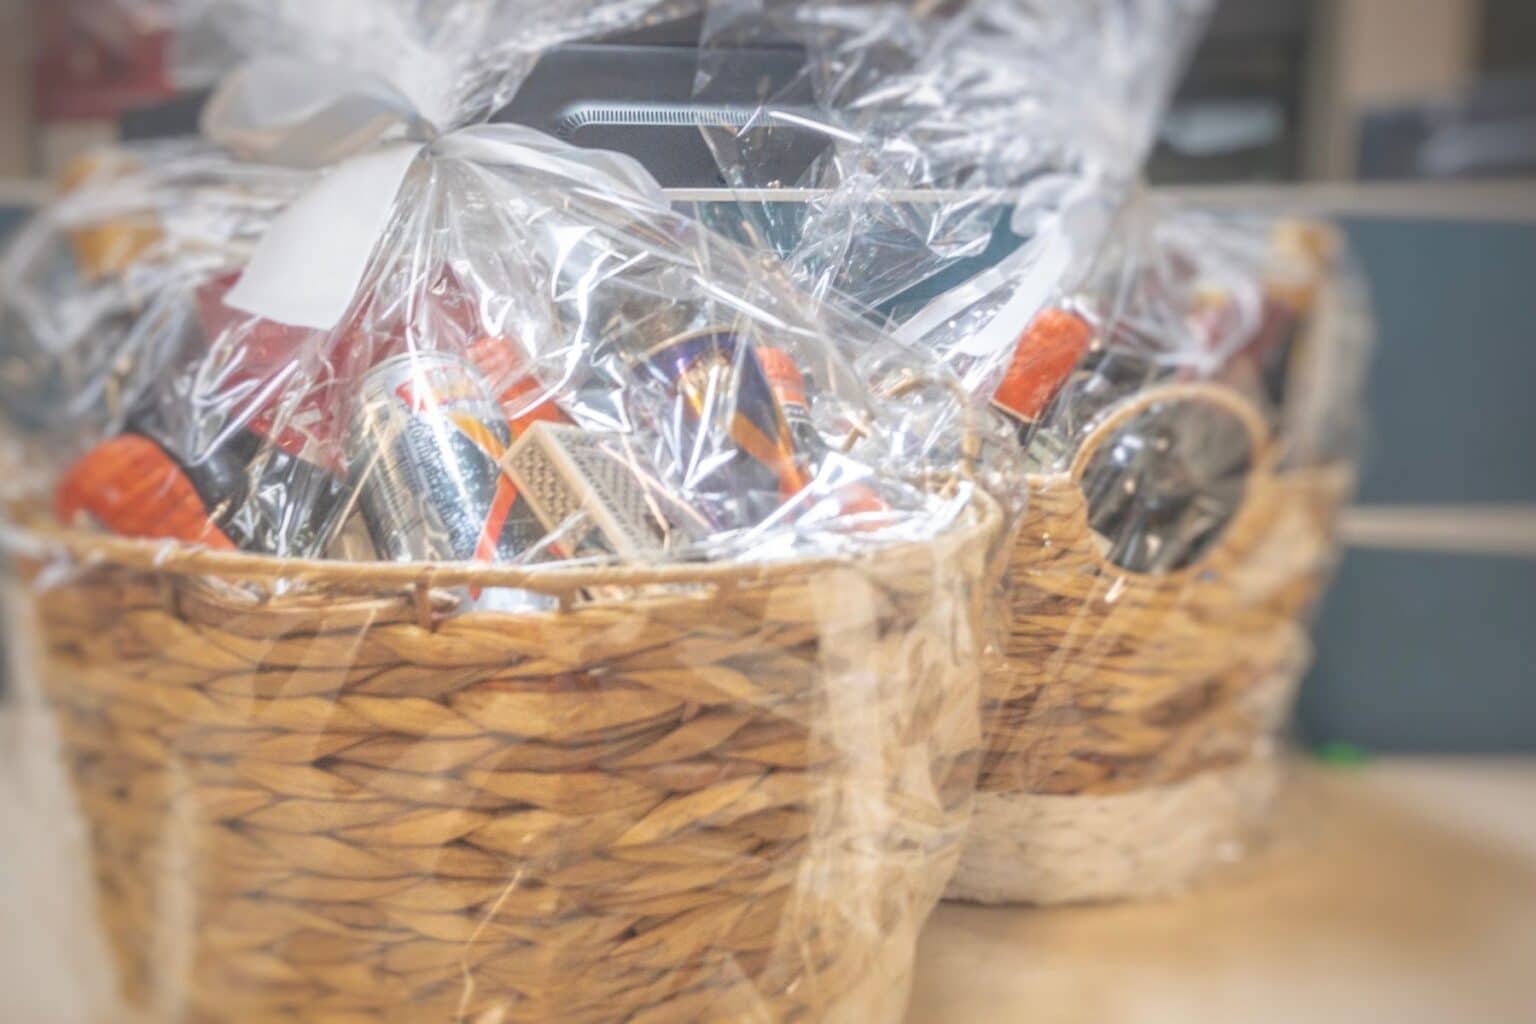 Prepared gift basket with assorted items inside